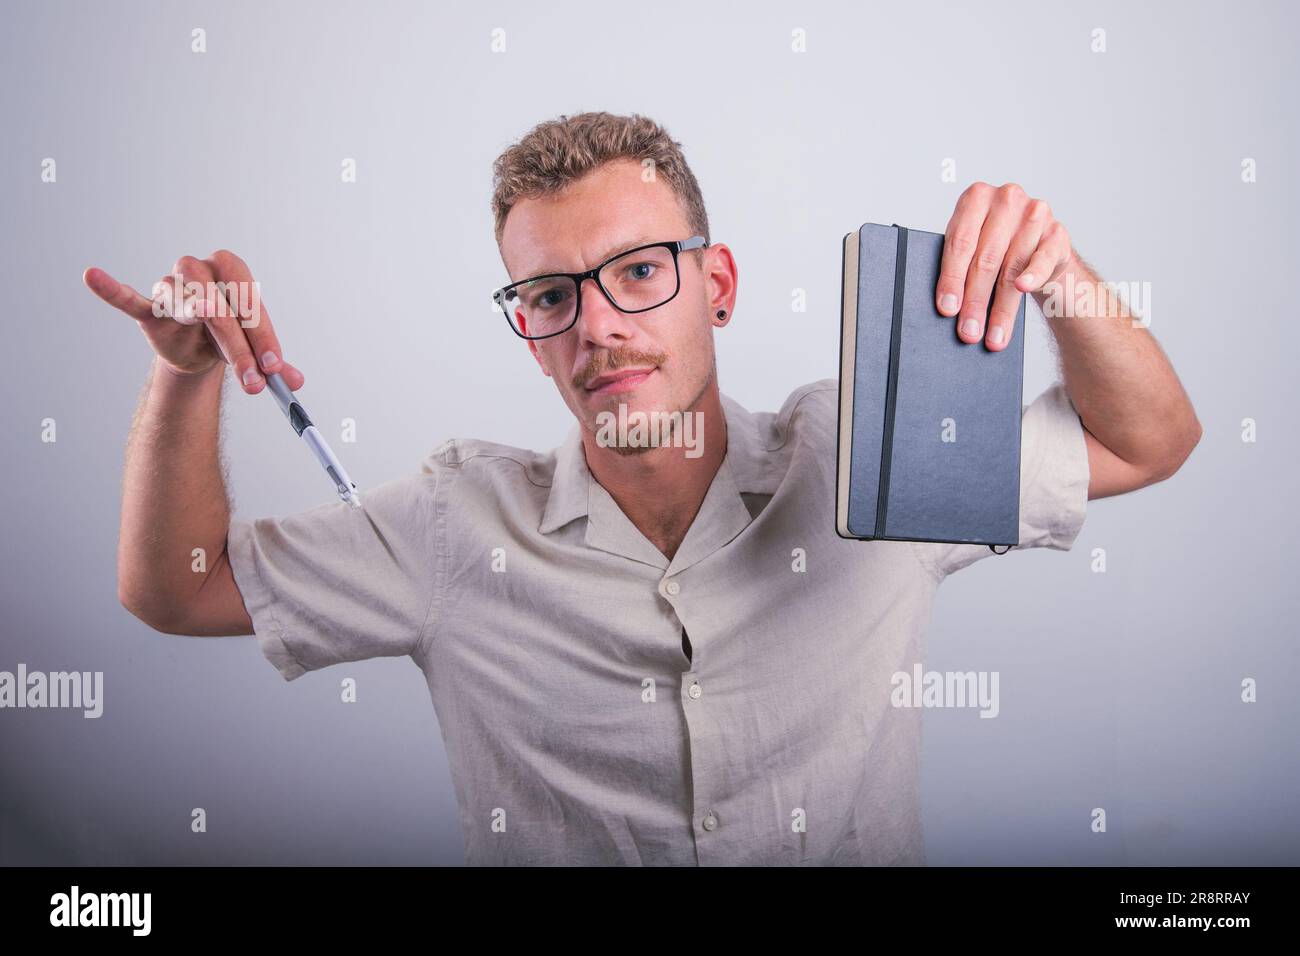 A writer is holding a pen and an agenda, confident expression, studio photo Stock Photo